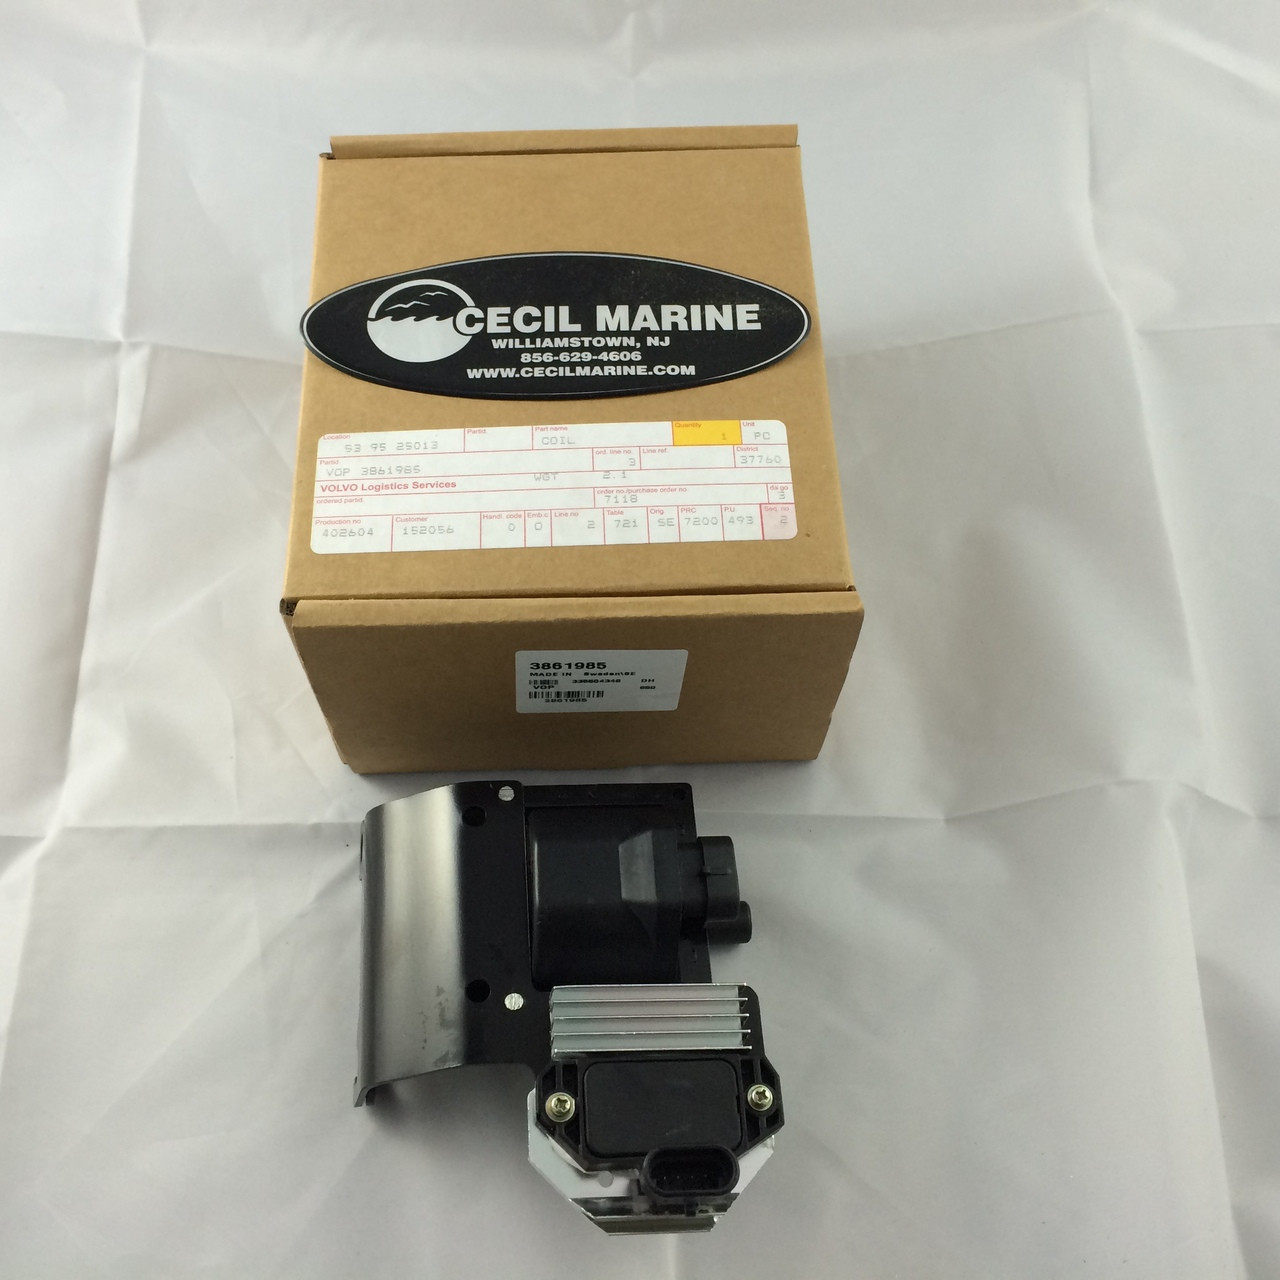 $259.99* GENUINE VOLVO no tax* IGNITION COIL 3861985 *In stock & ready to ship!